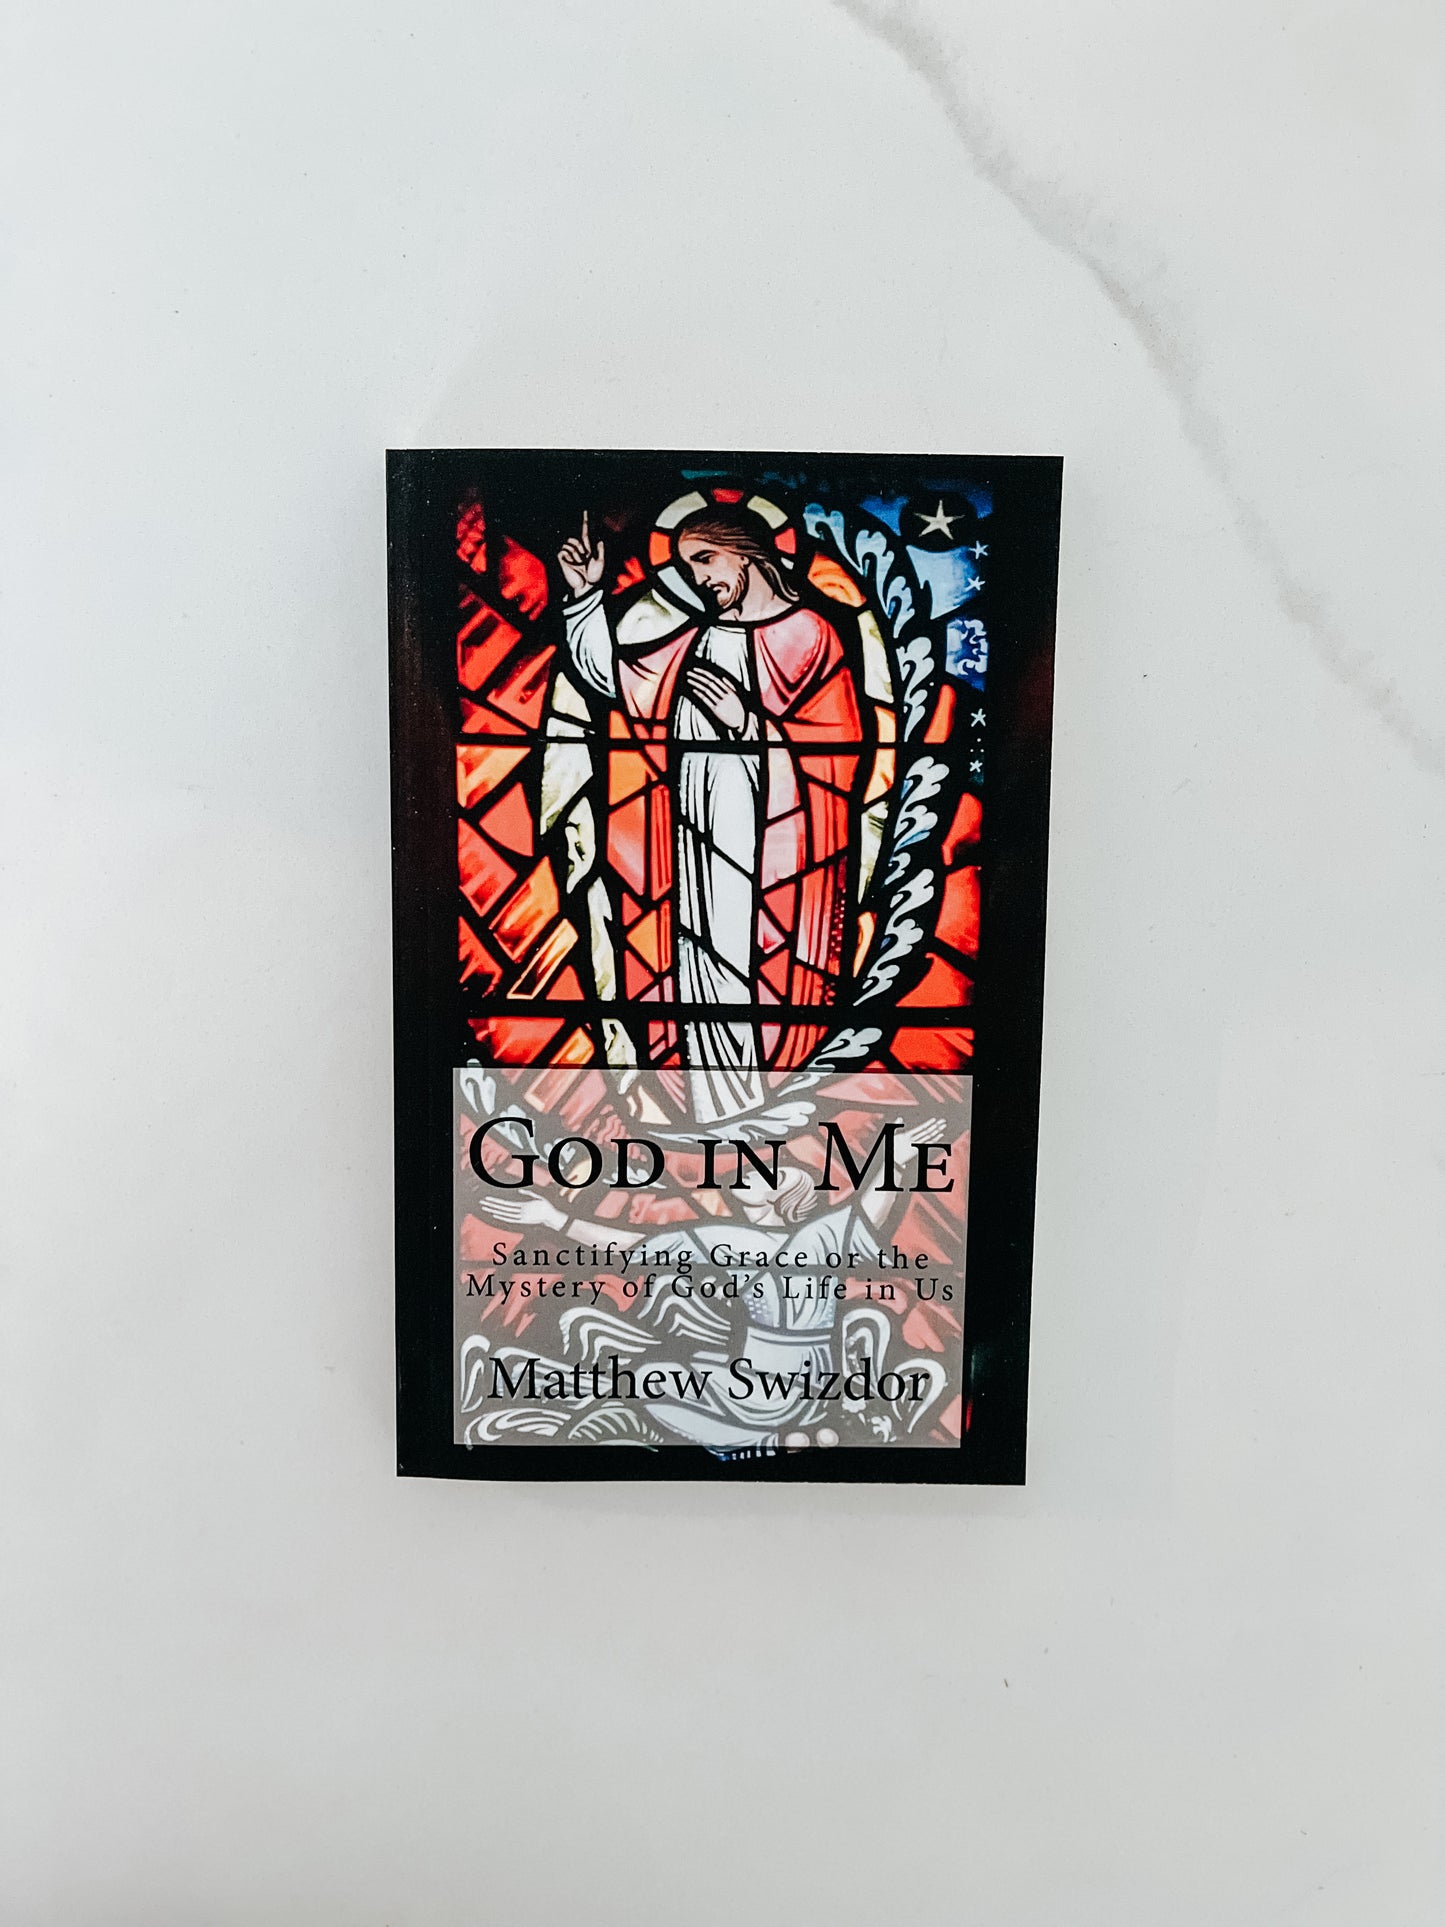 God in Me: Sanctifying Grace or the Mystery of God's Life in Us